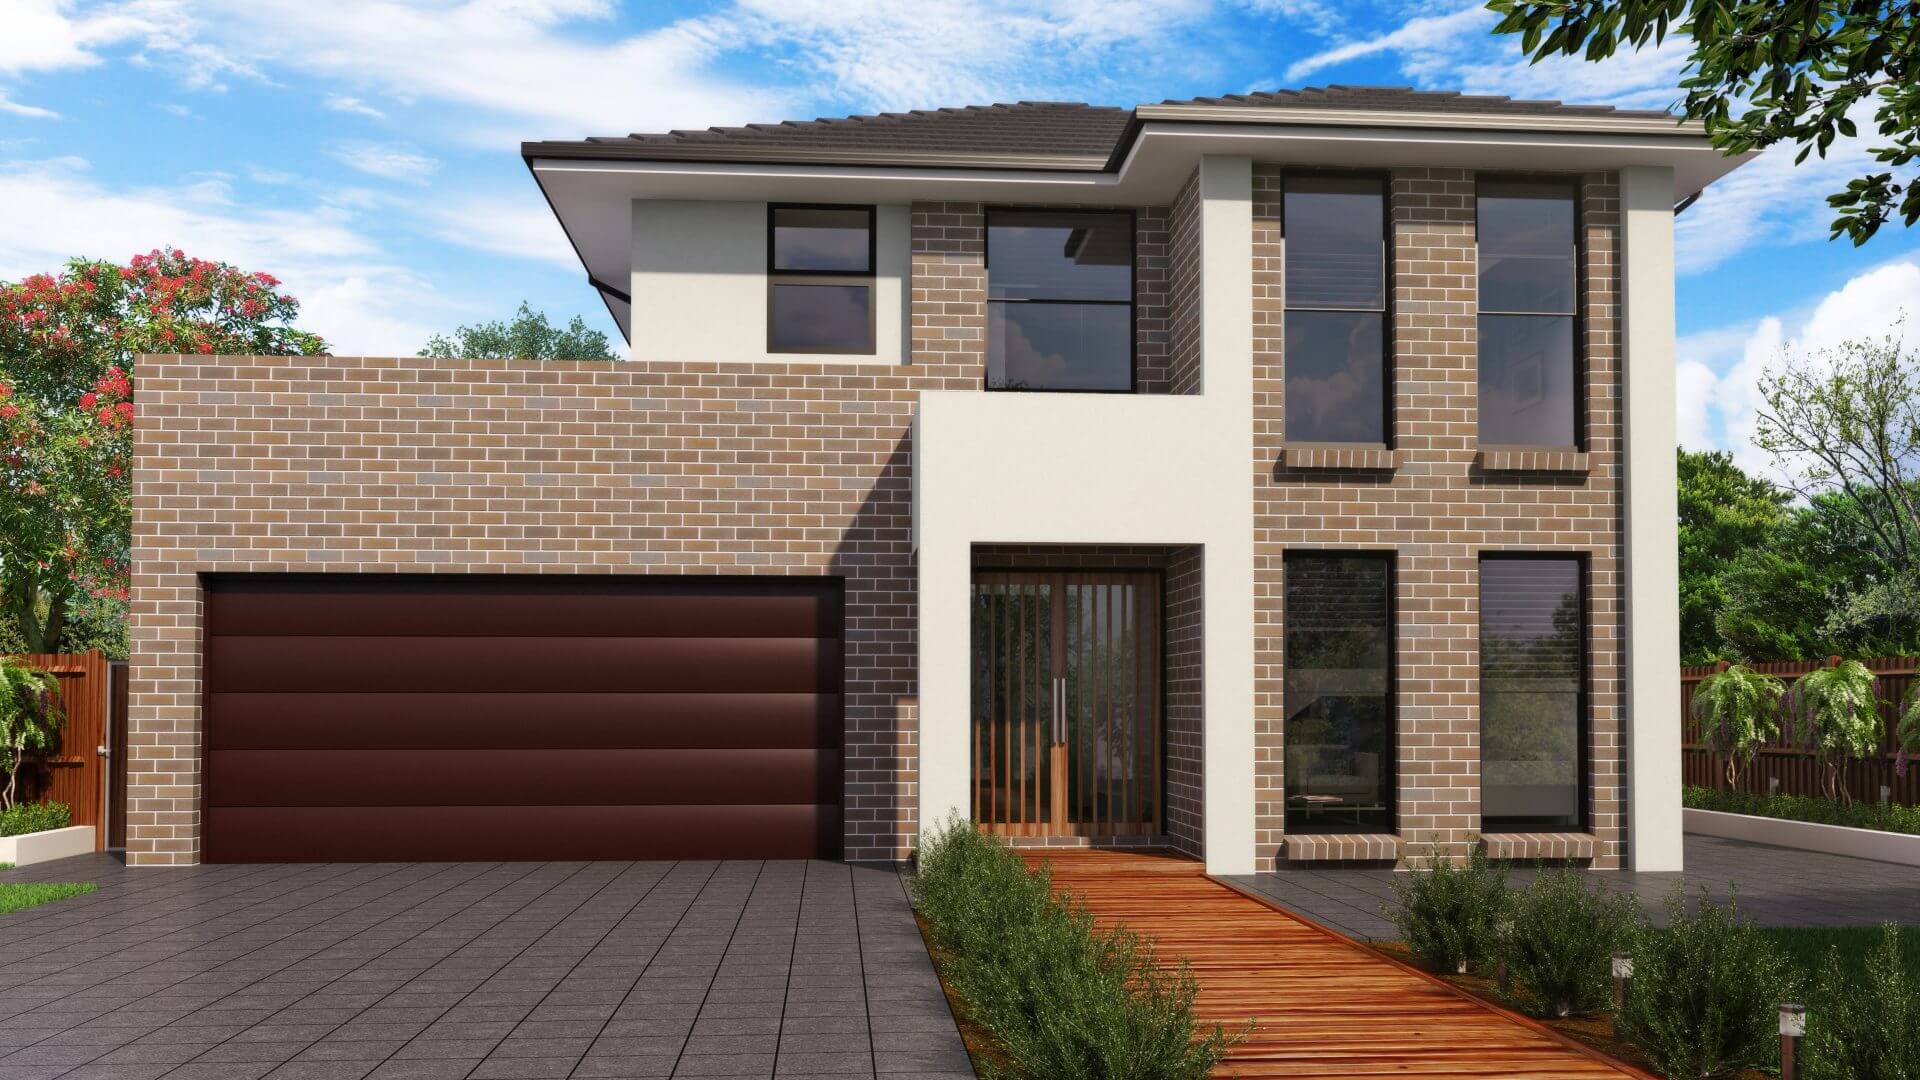 New Two Storey Home Design